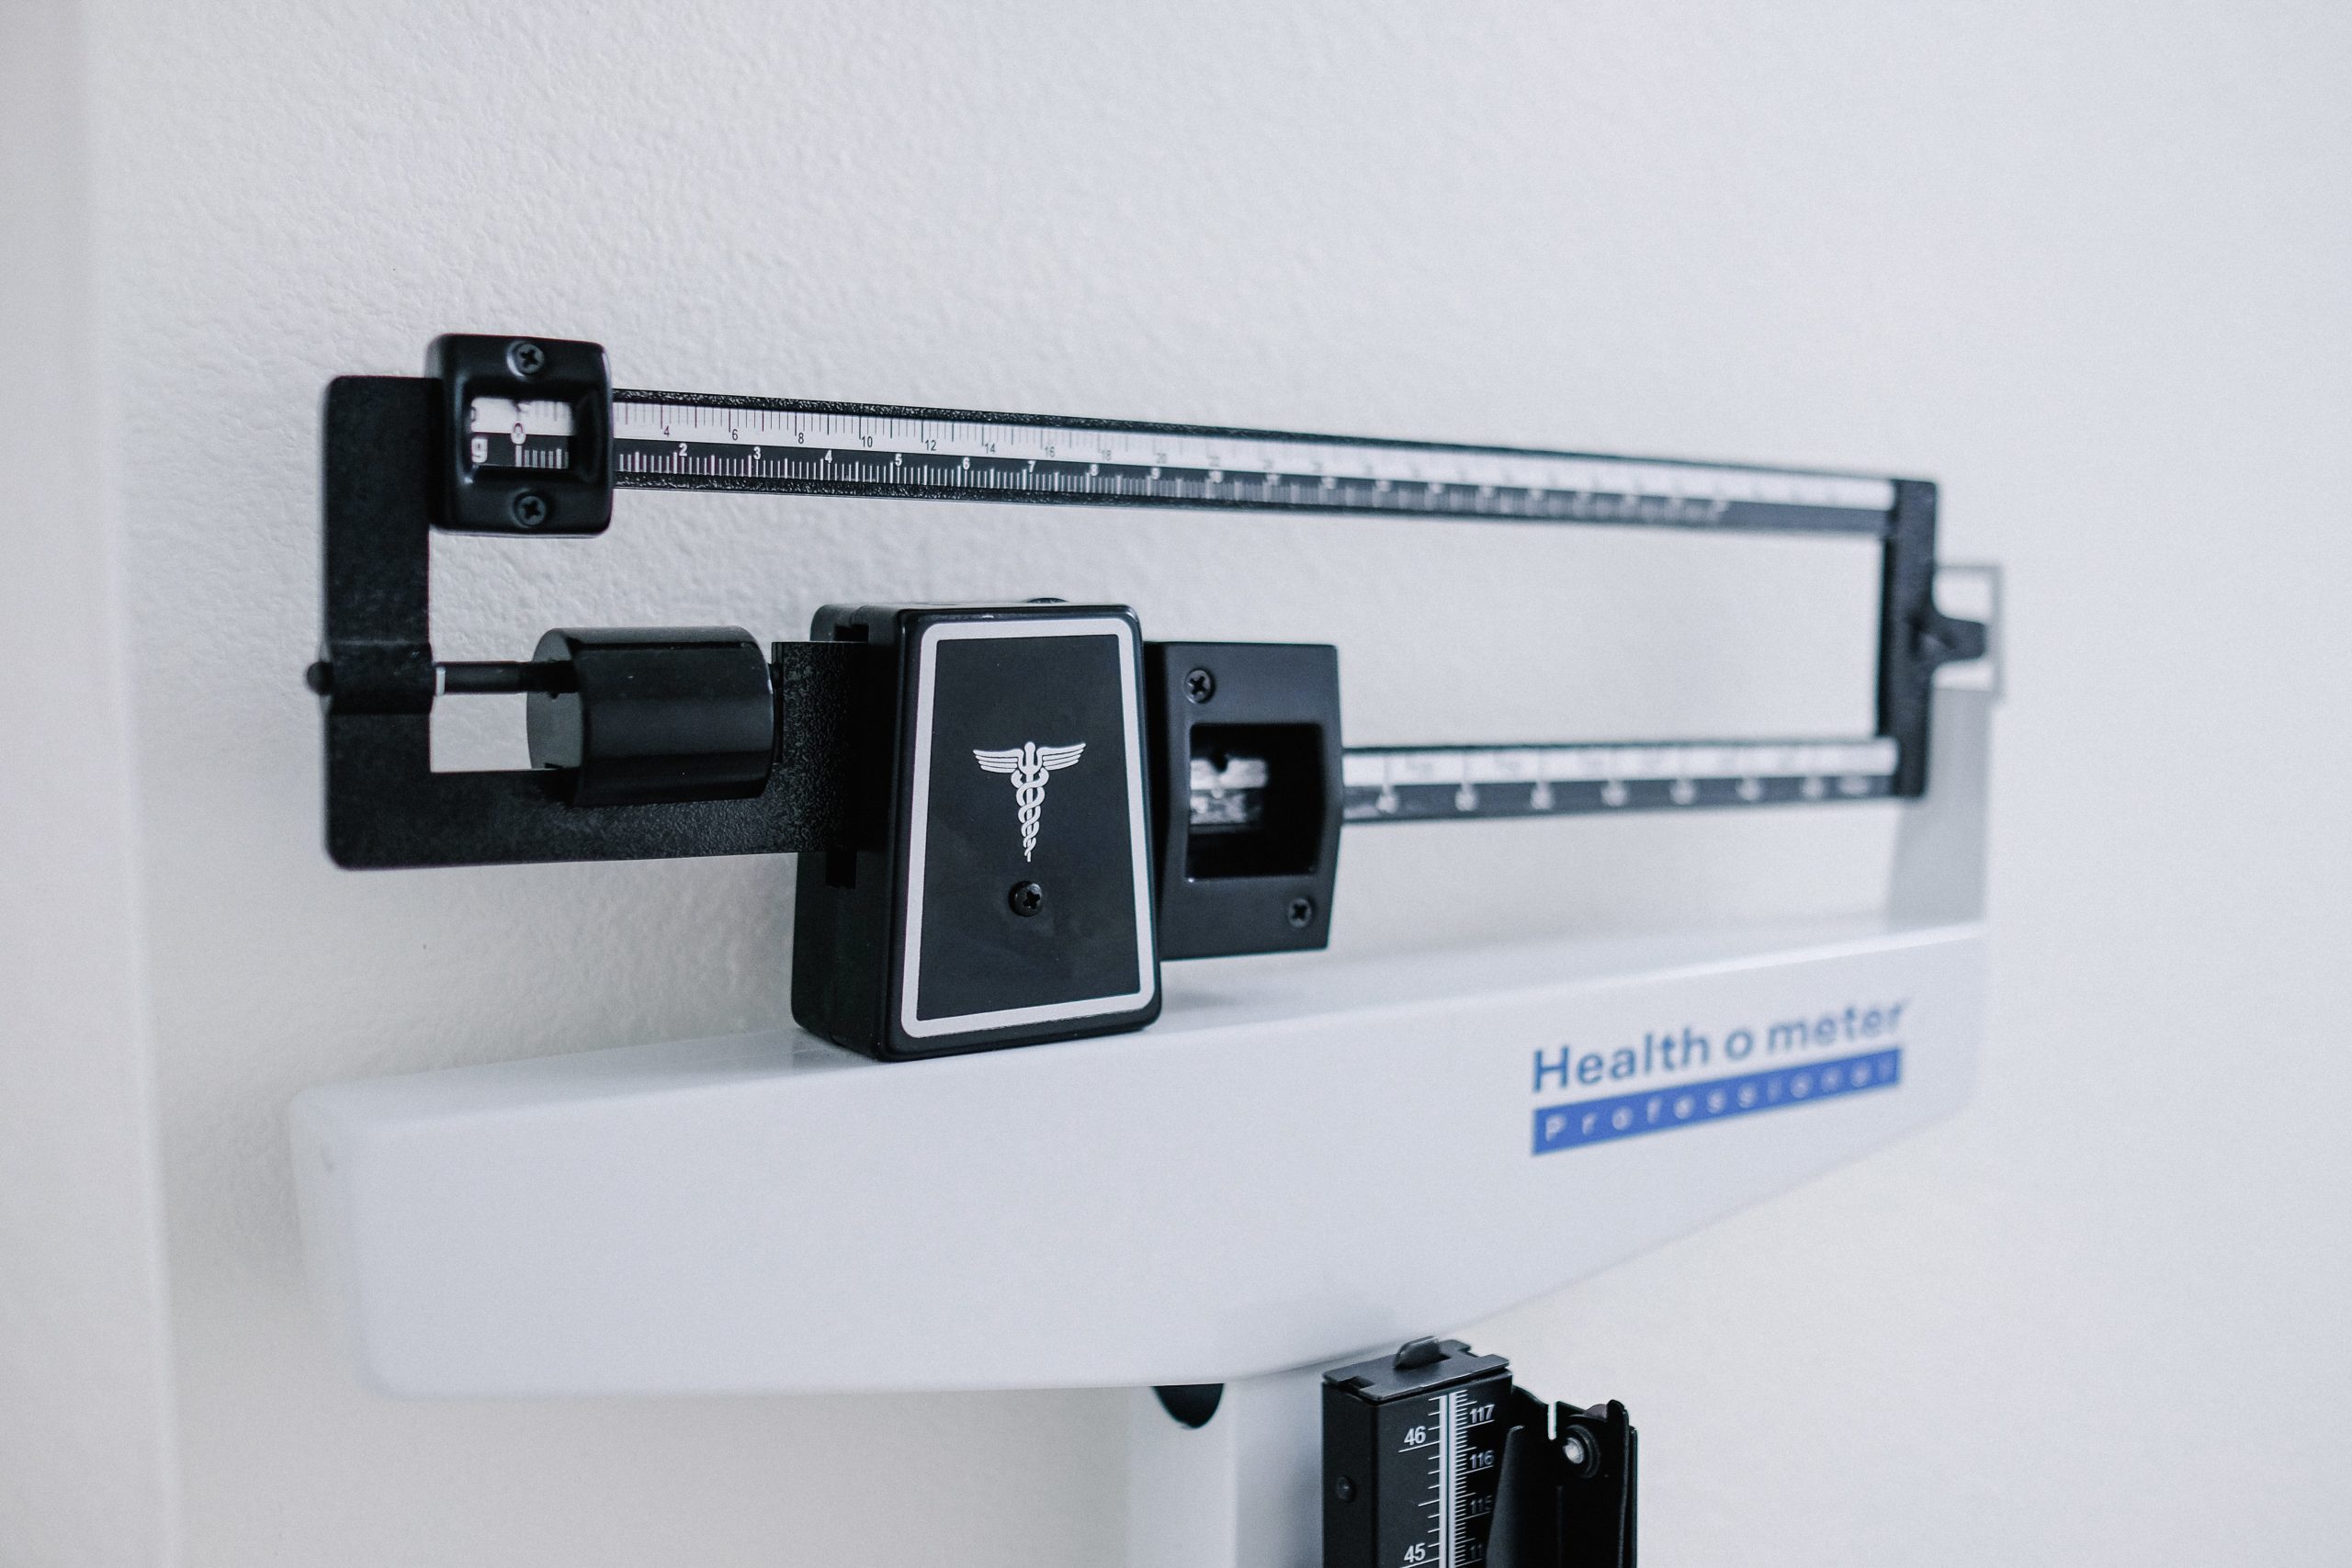 Measuring Health Without a Scale